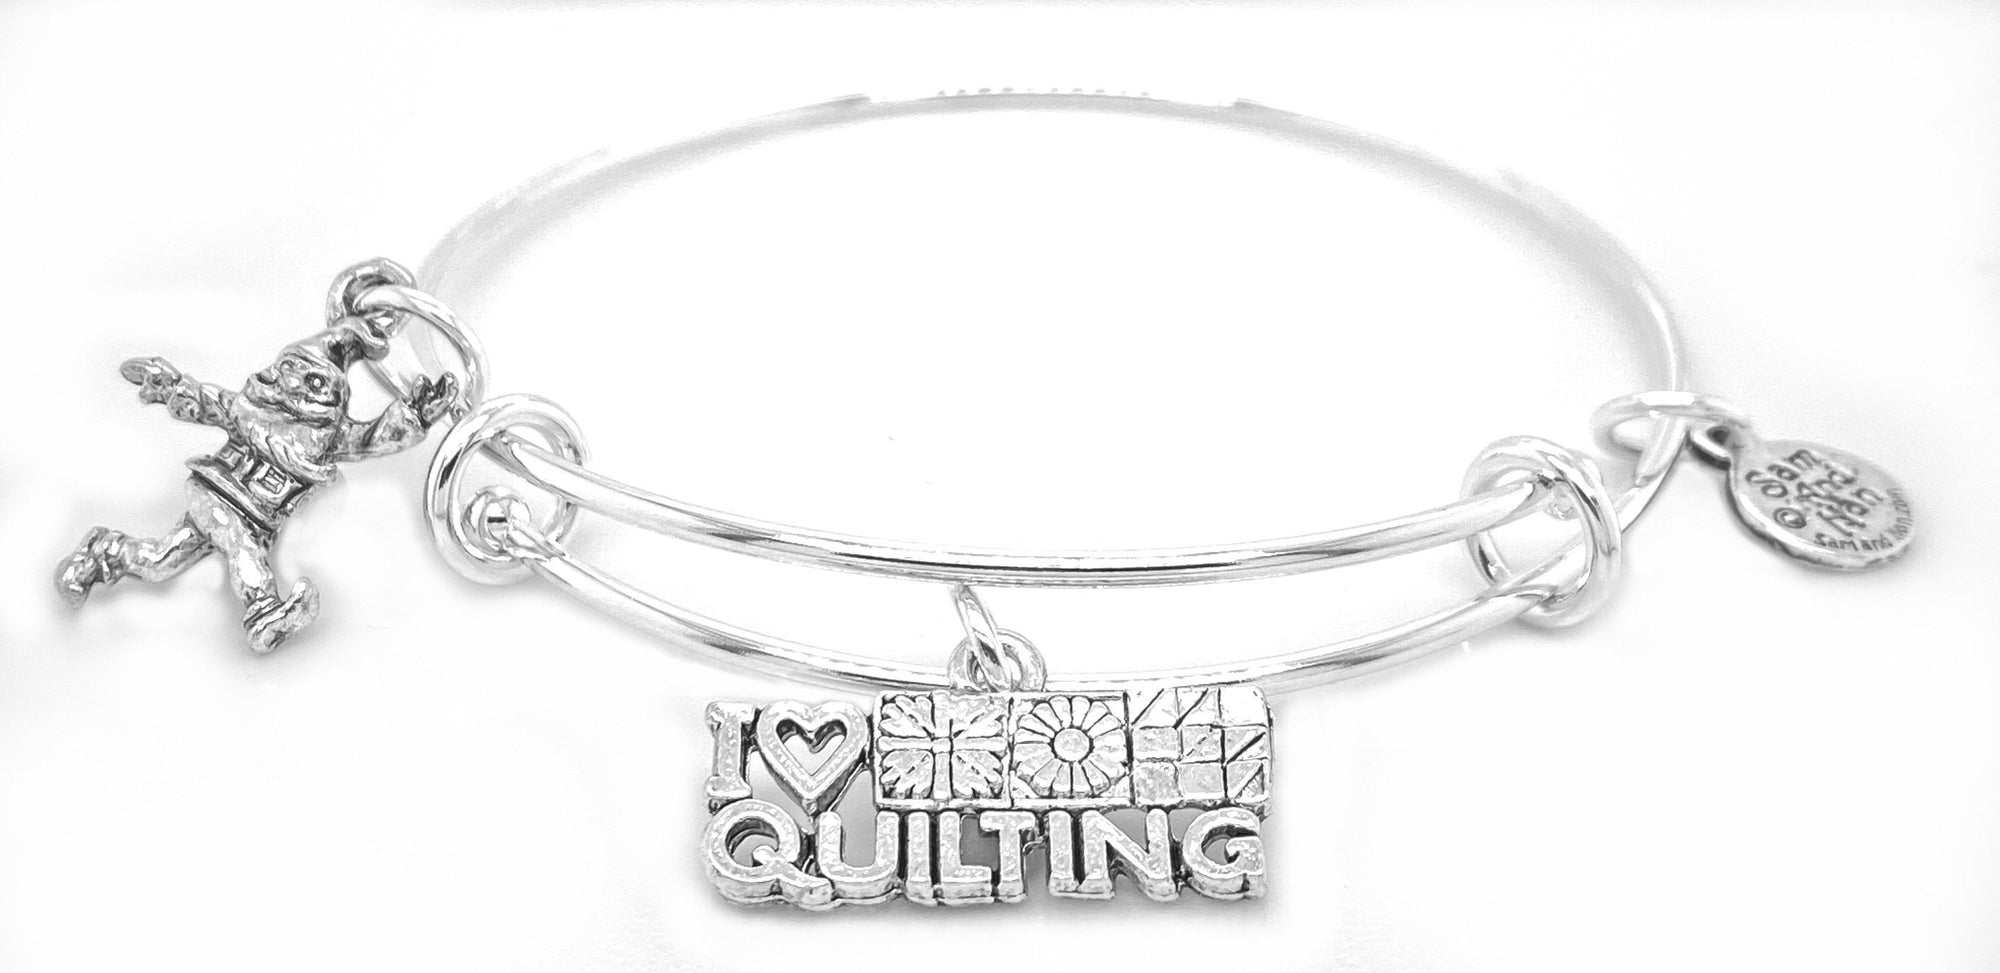 Sewing quilting silver bangle with I love quilting and elf charm